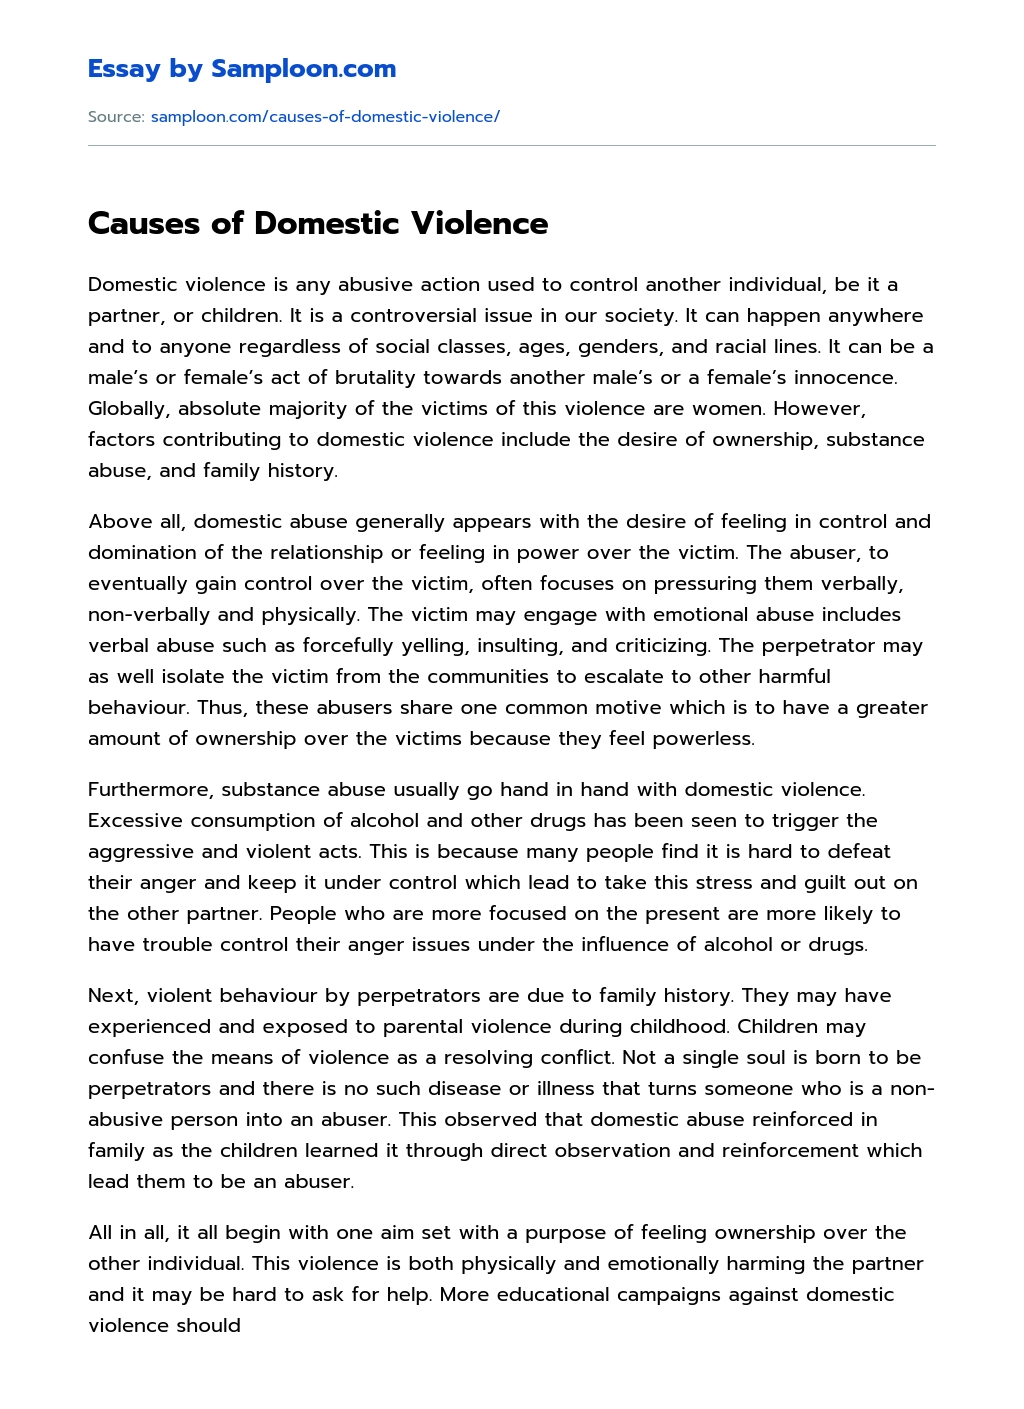 Causes of Domestic Violence essay